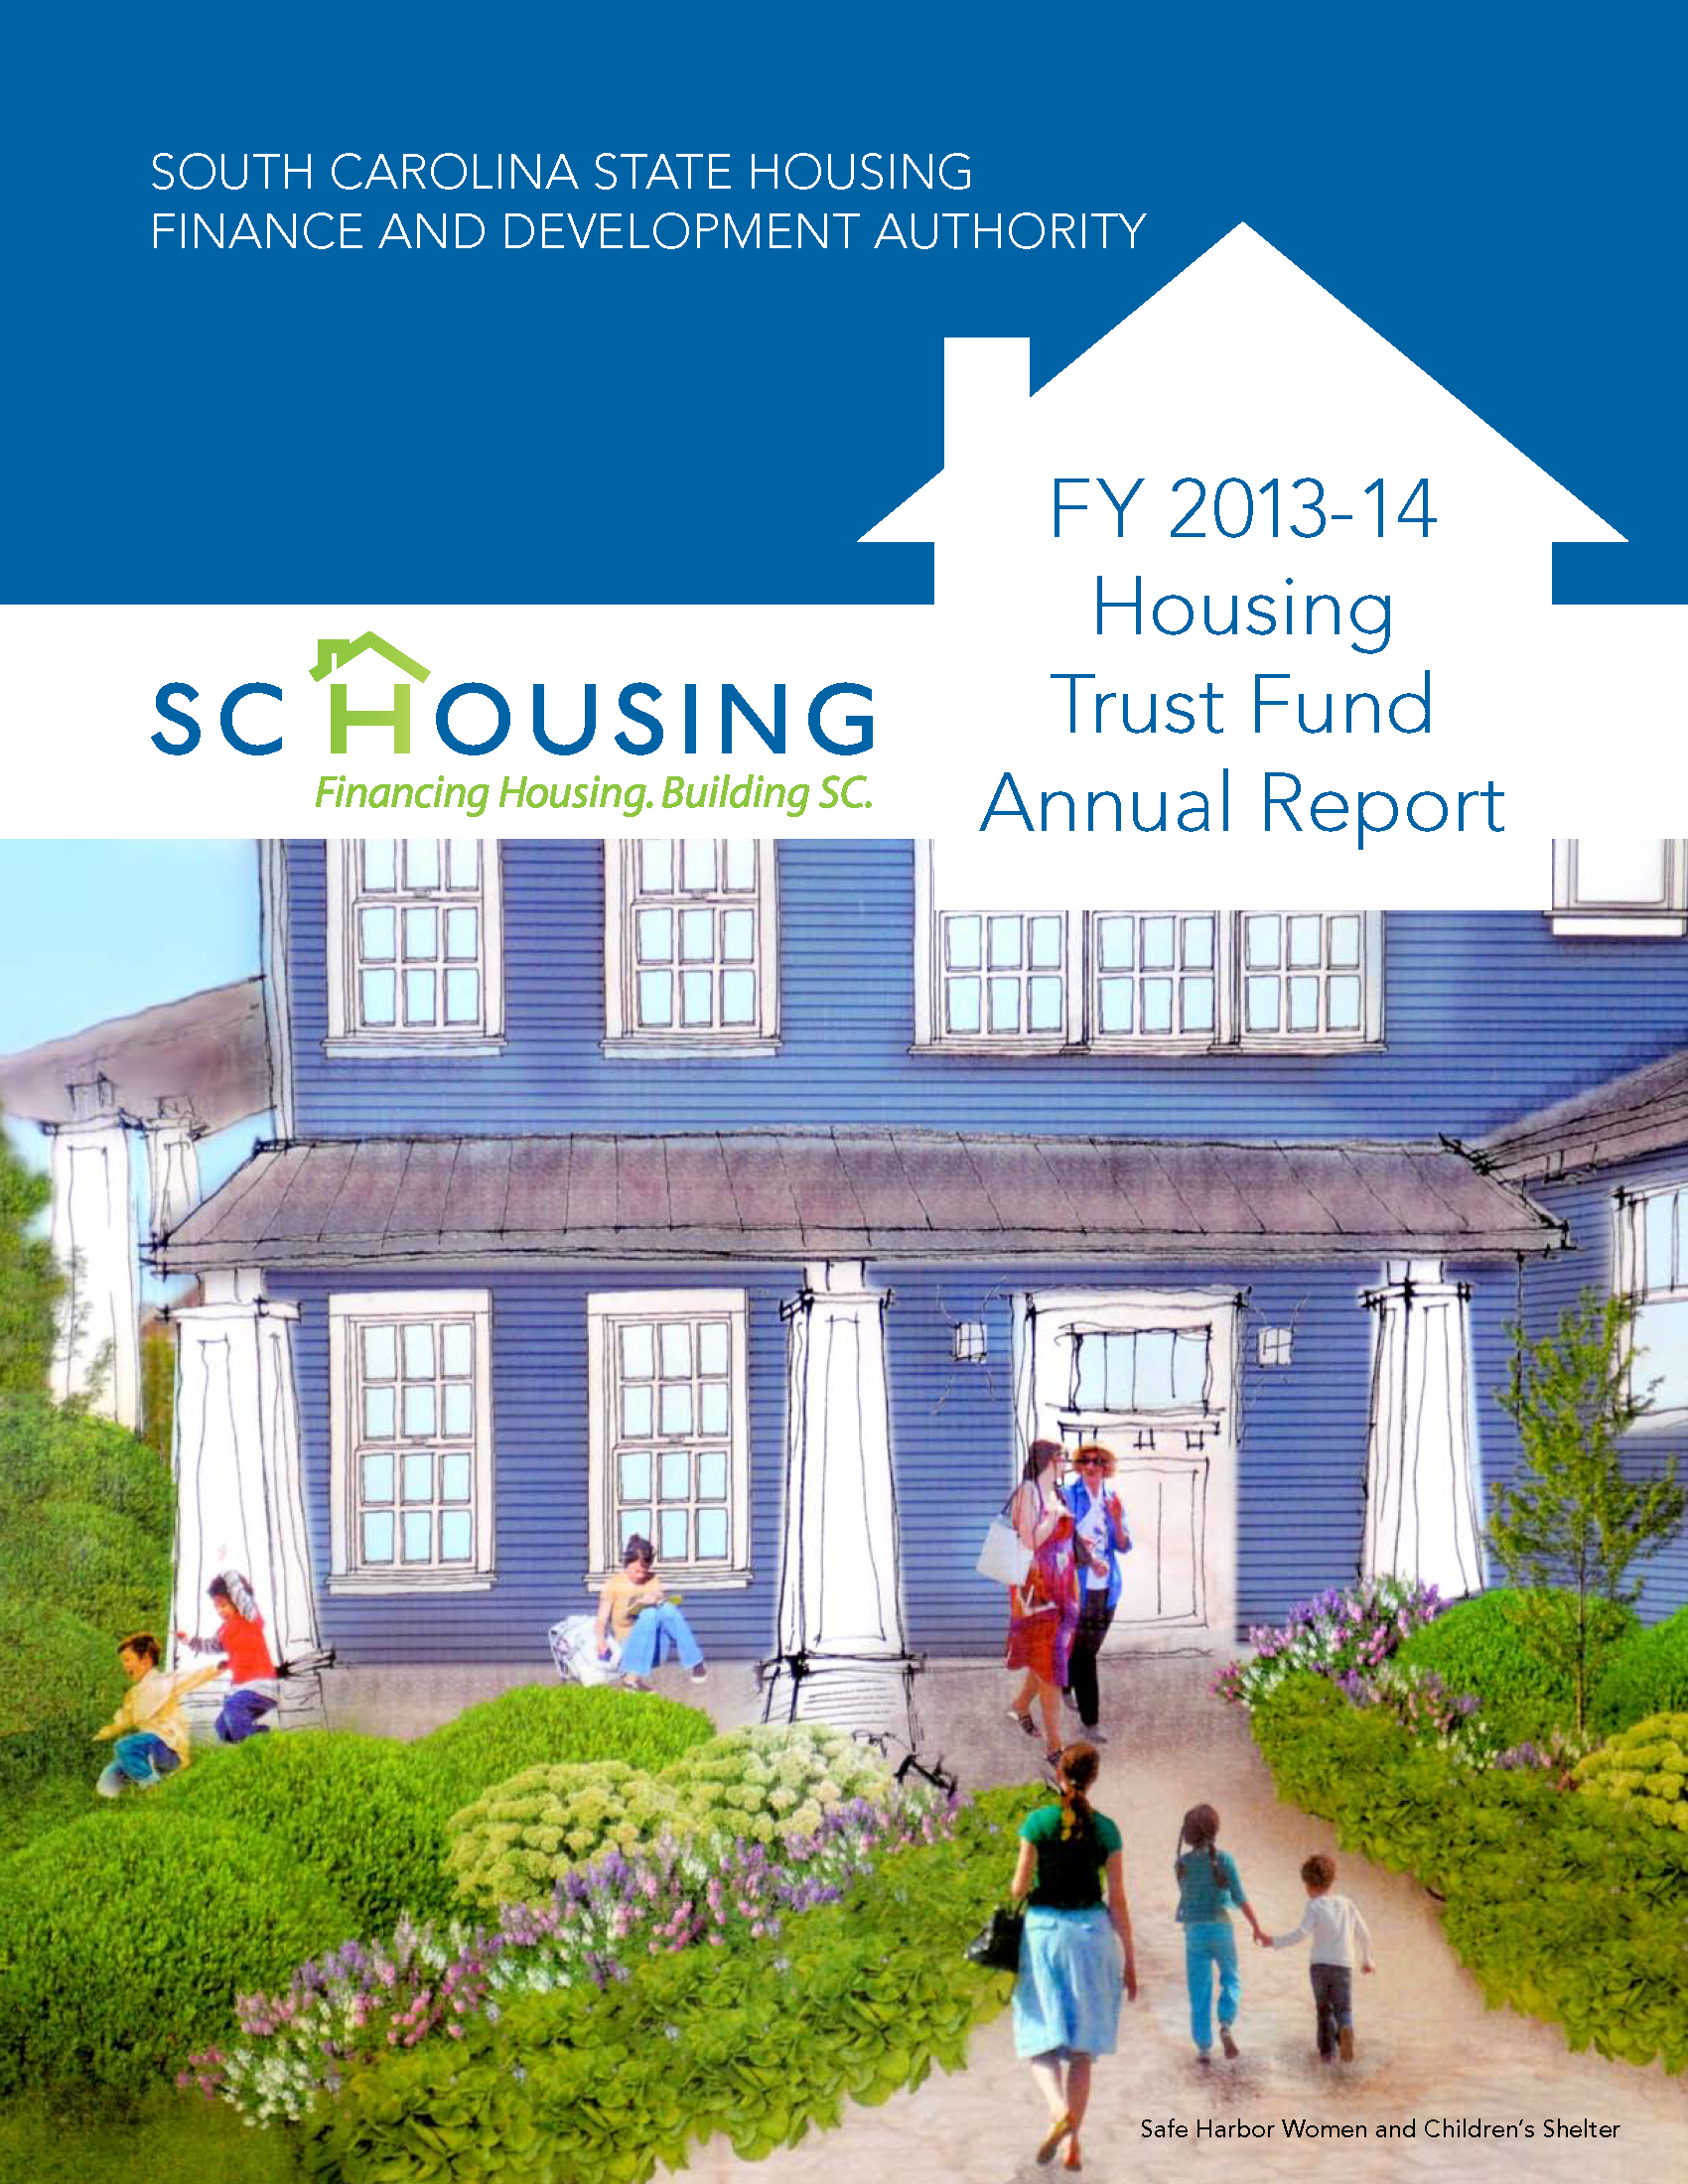 Housing Trust Fund Report for Fiscal Year 2014